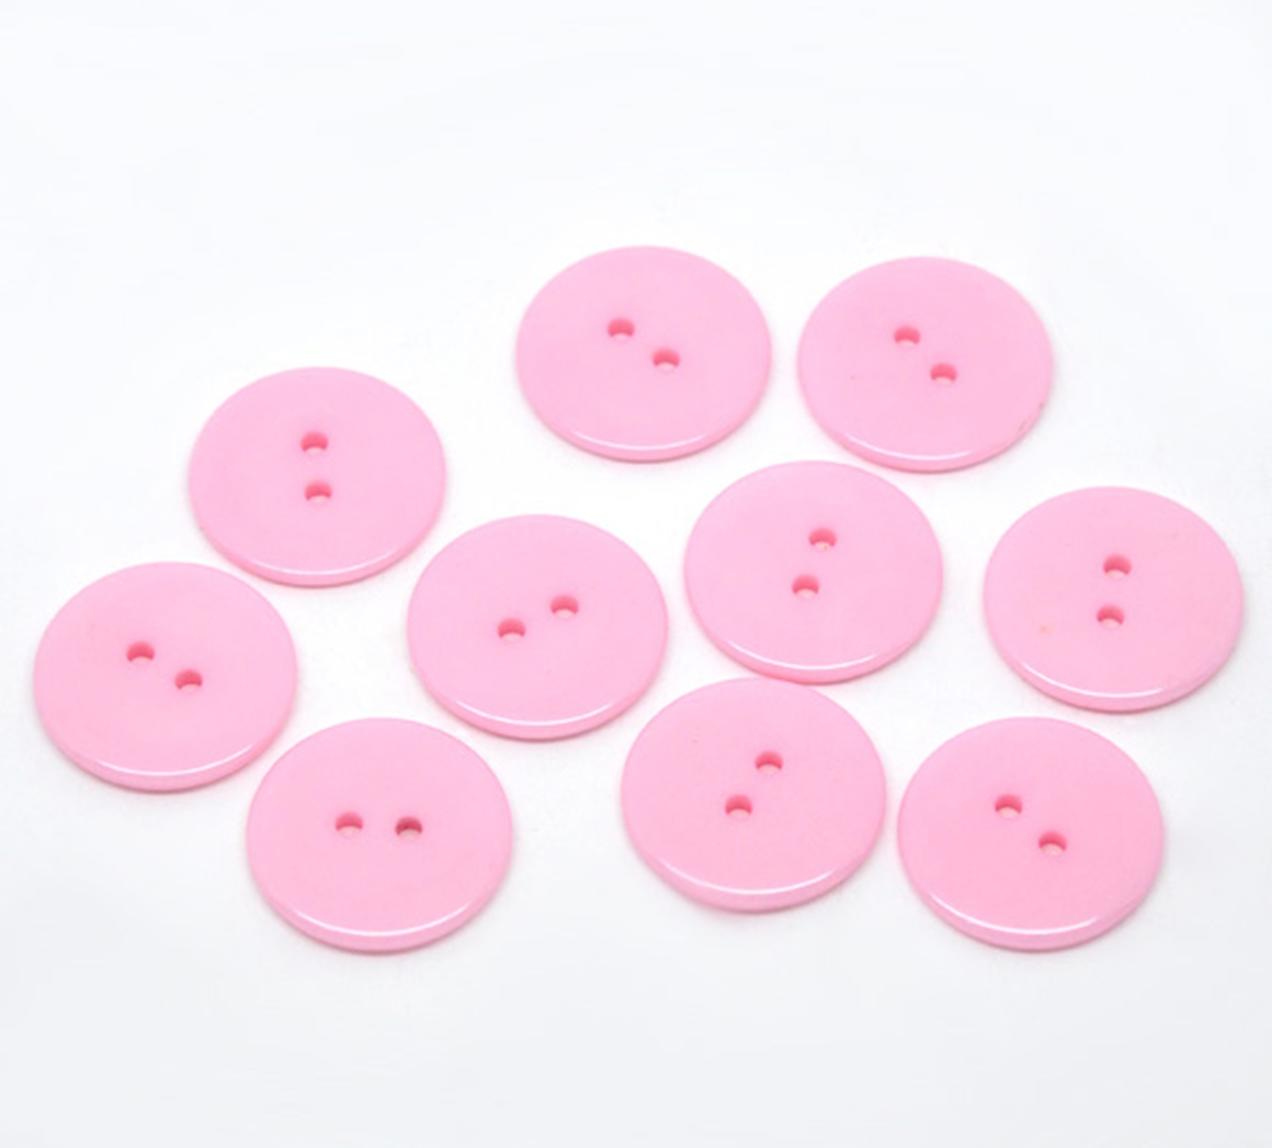 Pink 23mm round large resin sewing buttons